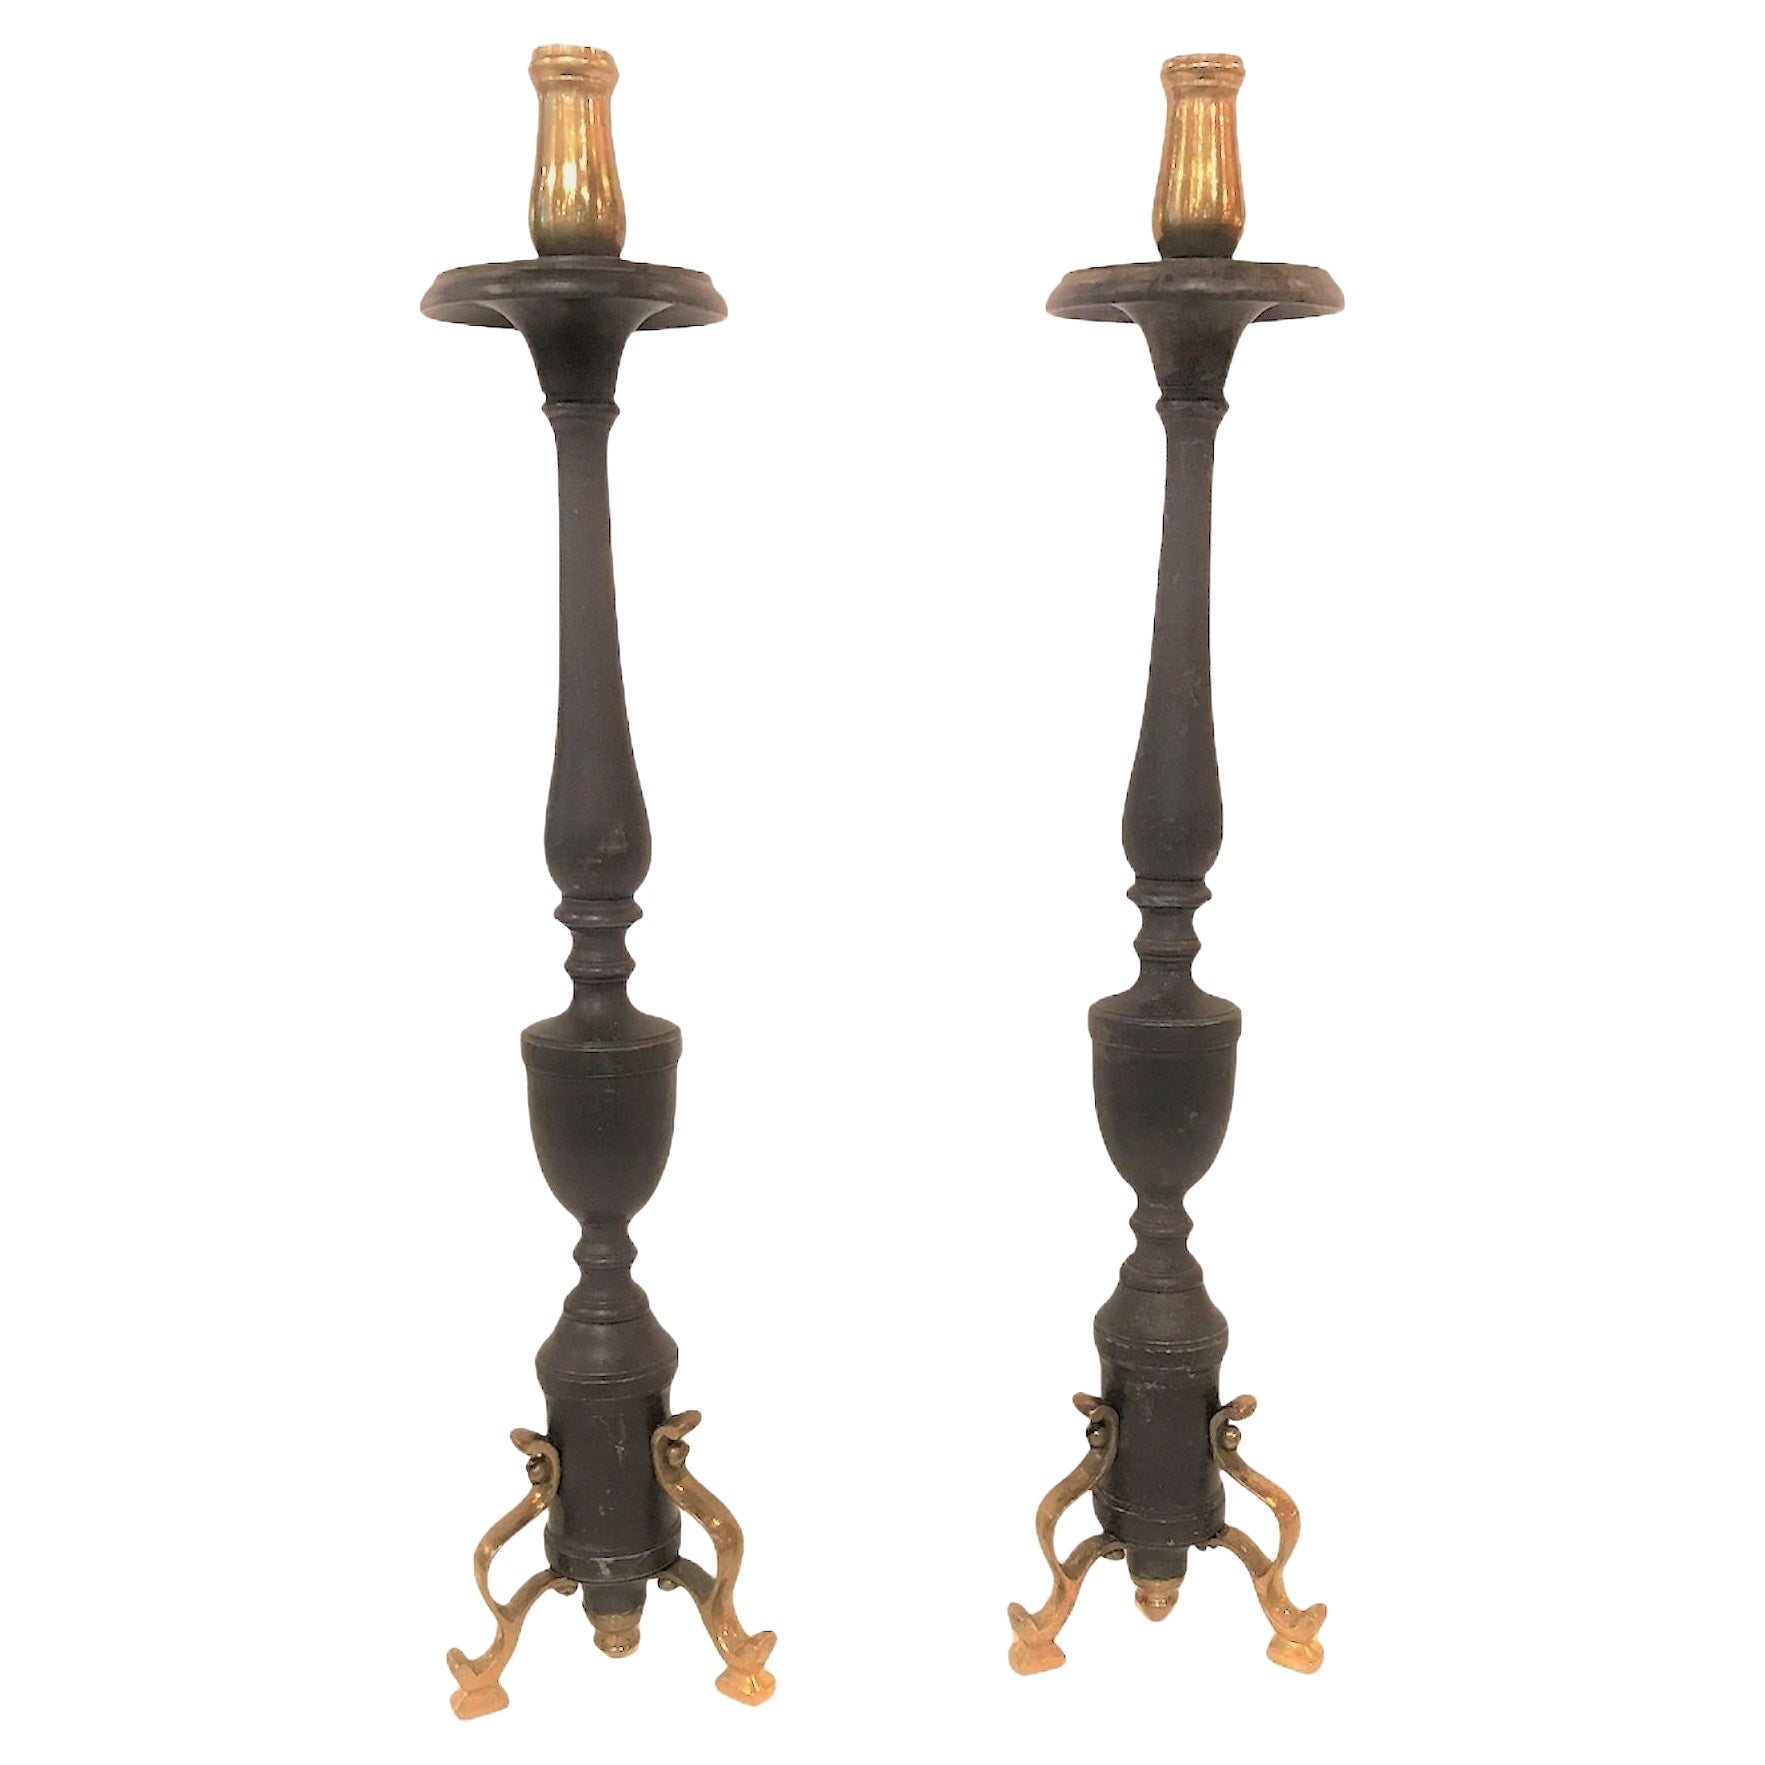 Neapolitan 18th Century Late Baroque Pair of  Bronze Altar Candlesticks For Sale